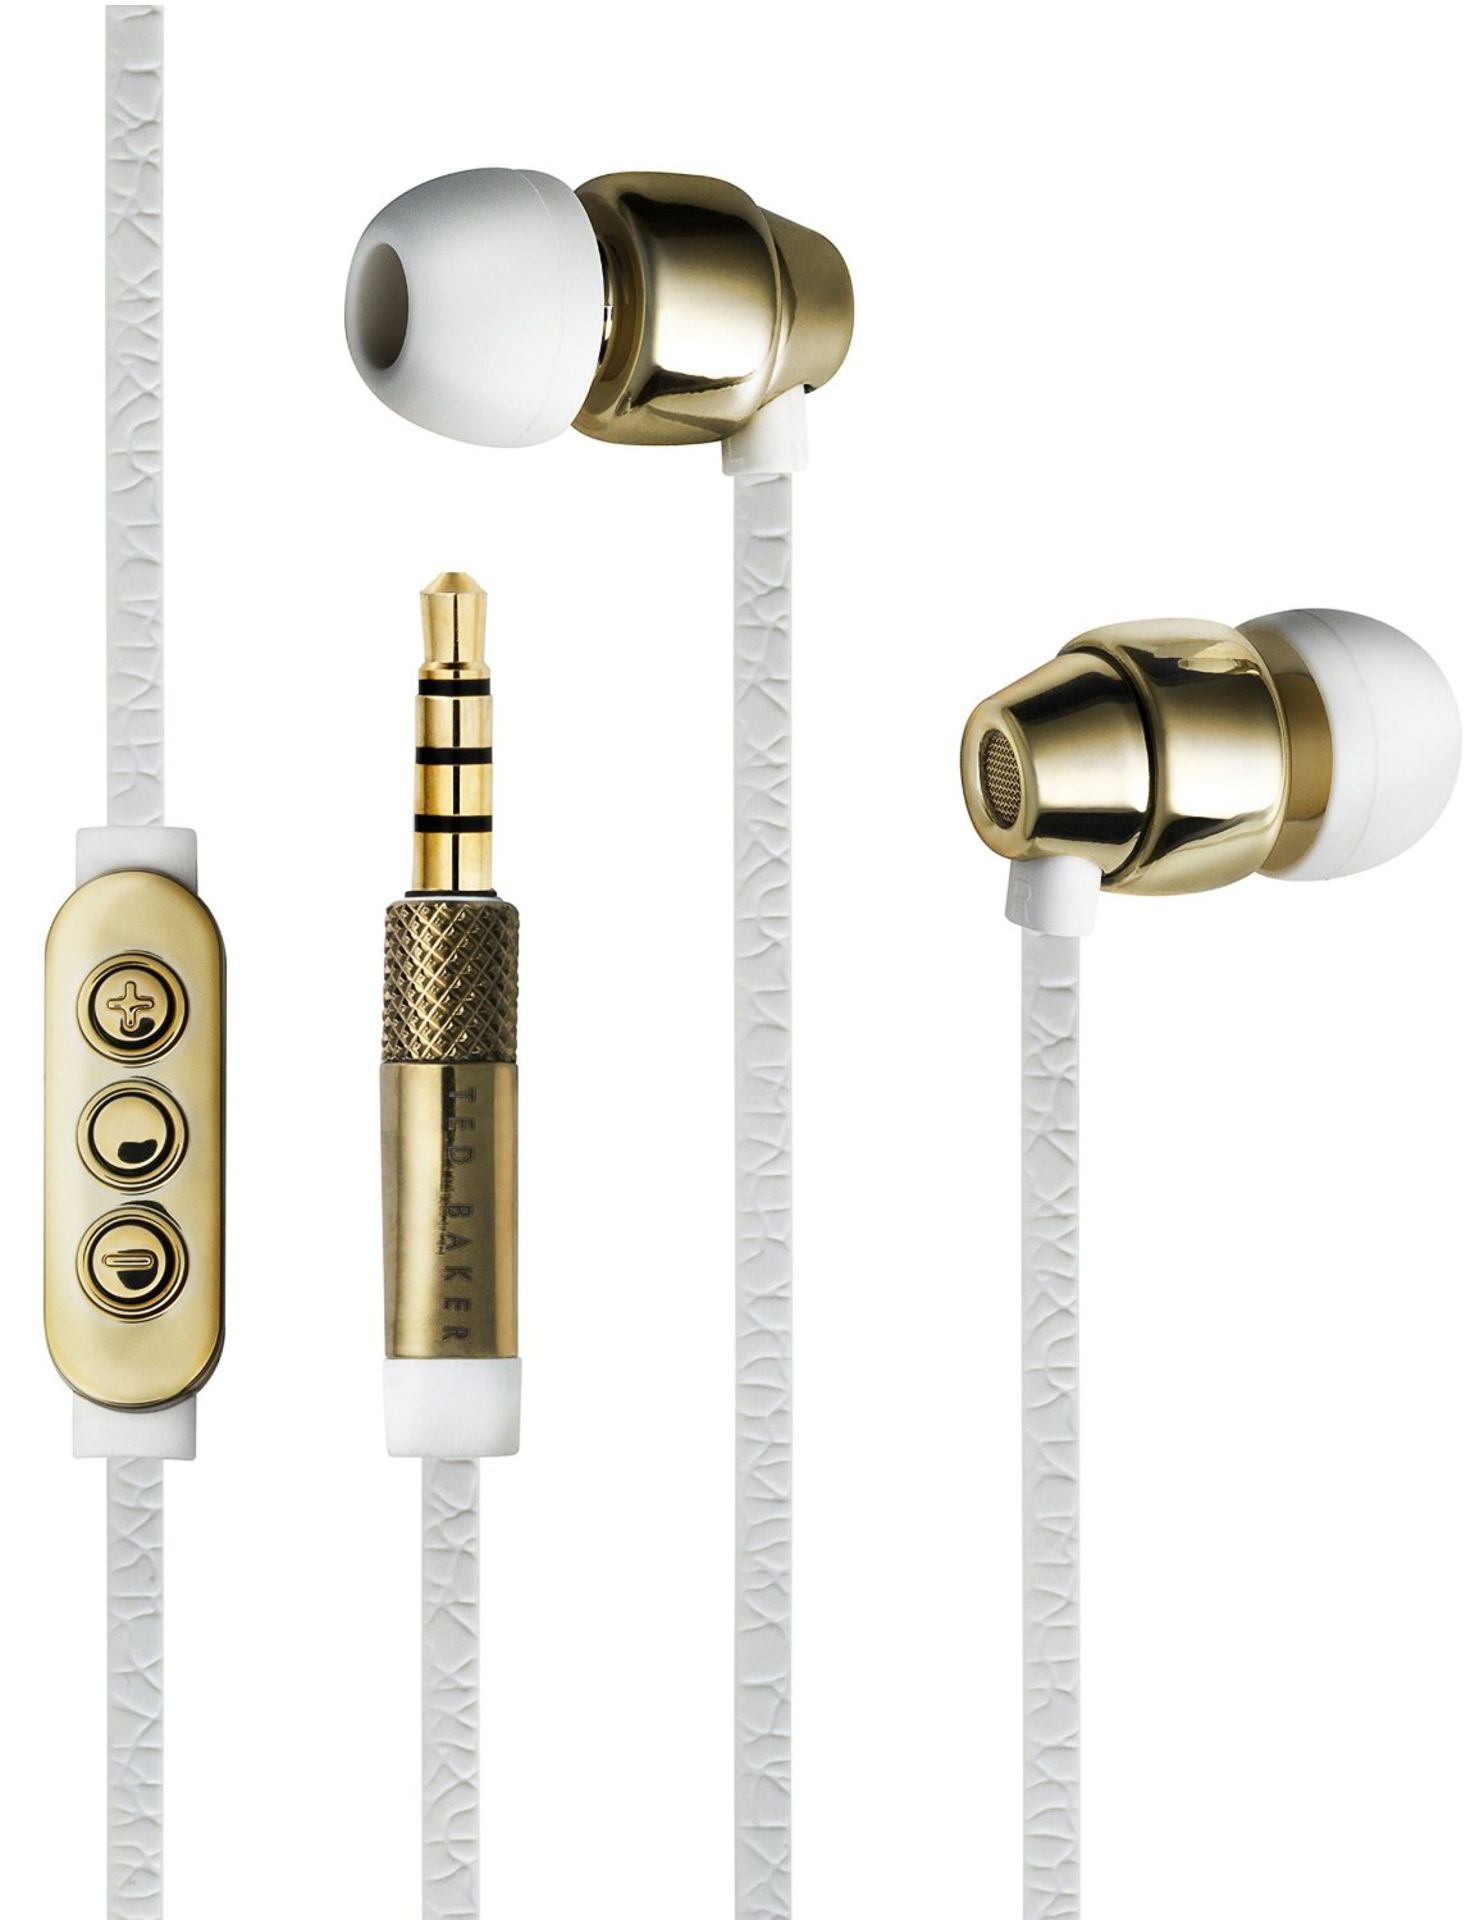 V *TRADE QTY* Brand New Ted Baker Dover High Performance In-Ear Earphones White/Gold RRP £59.99